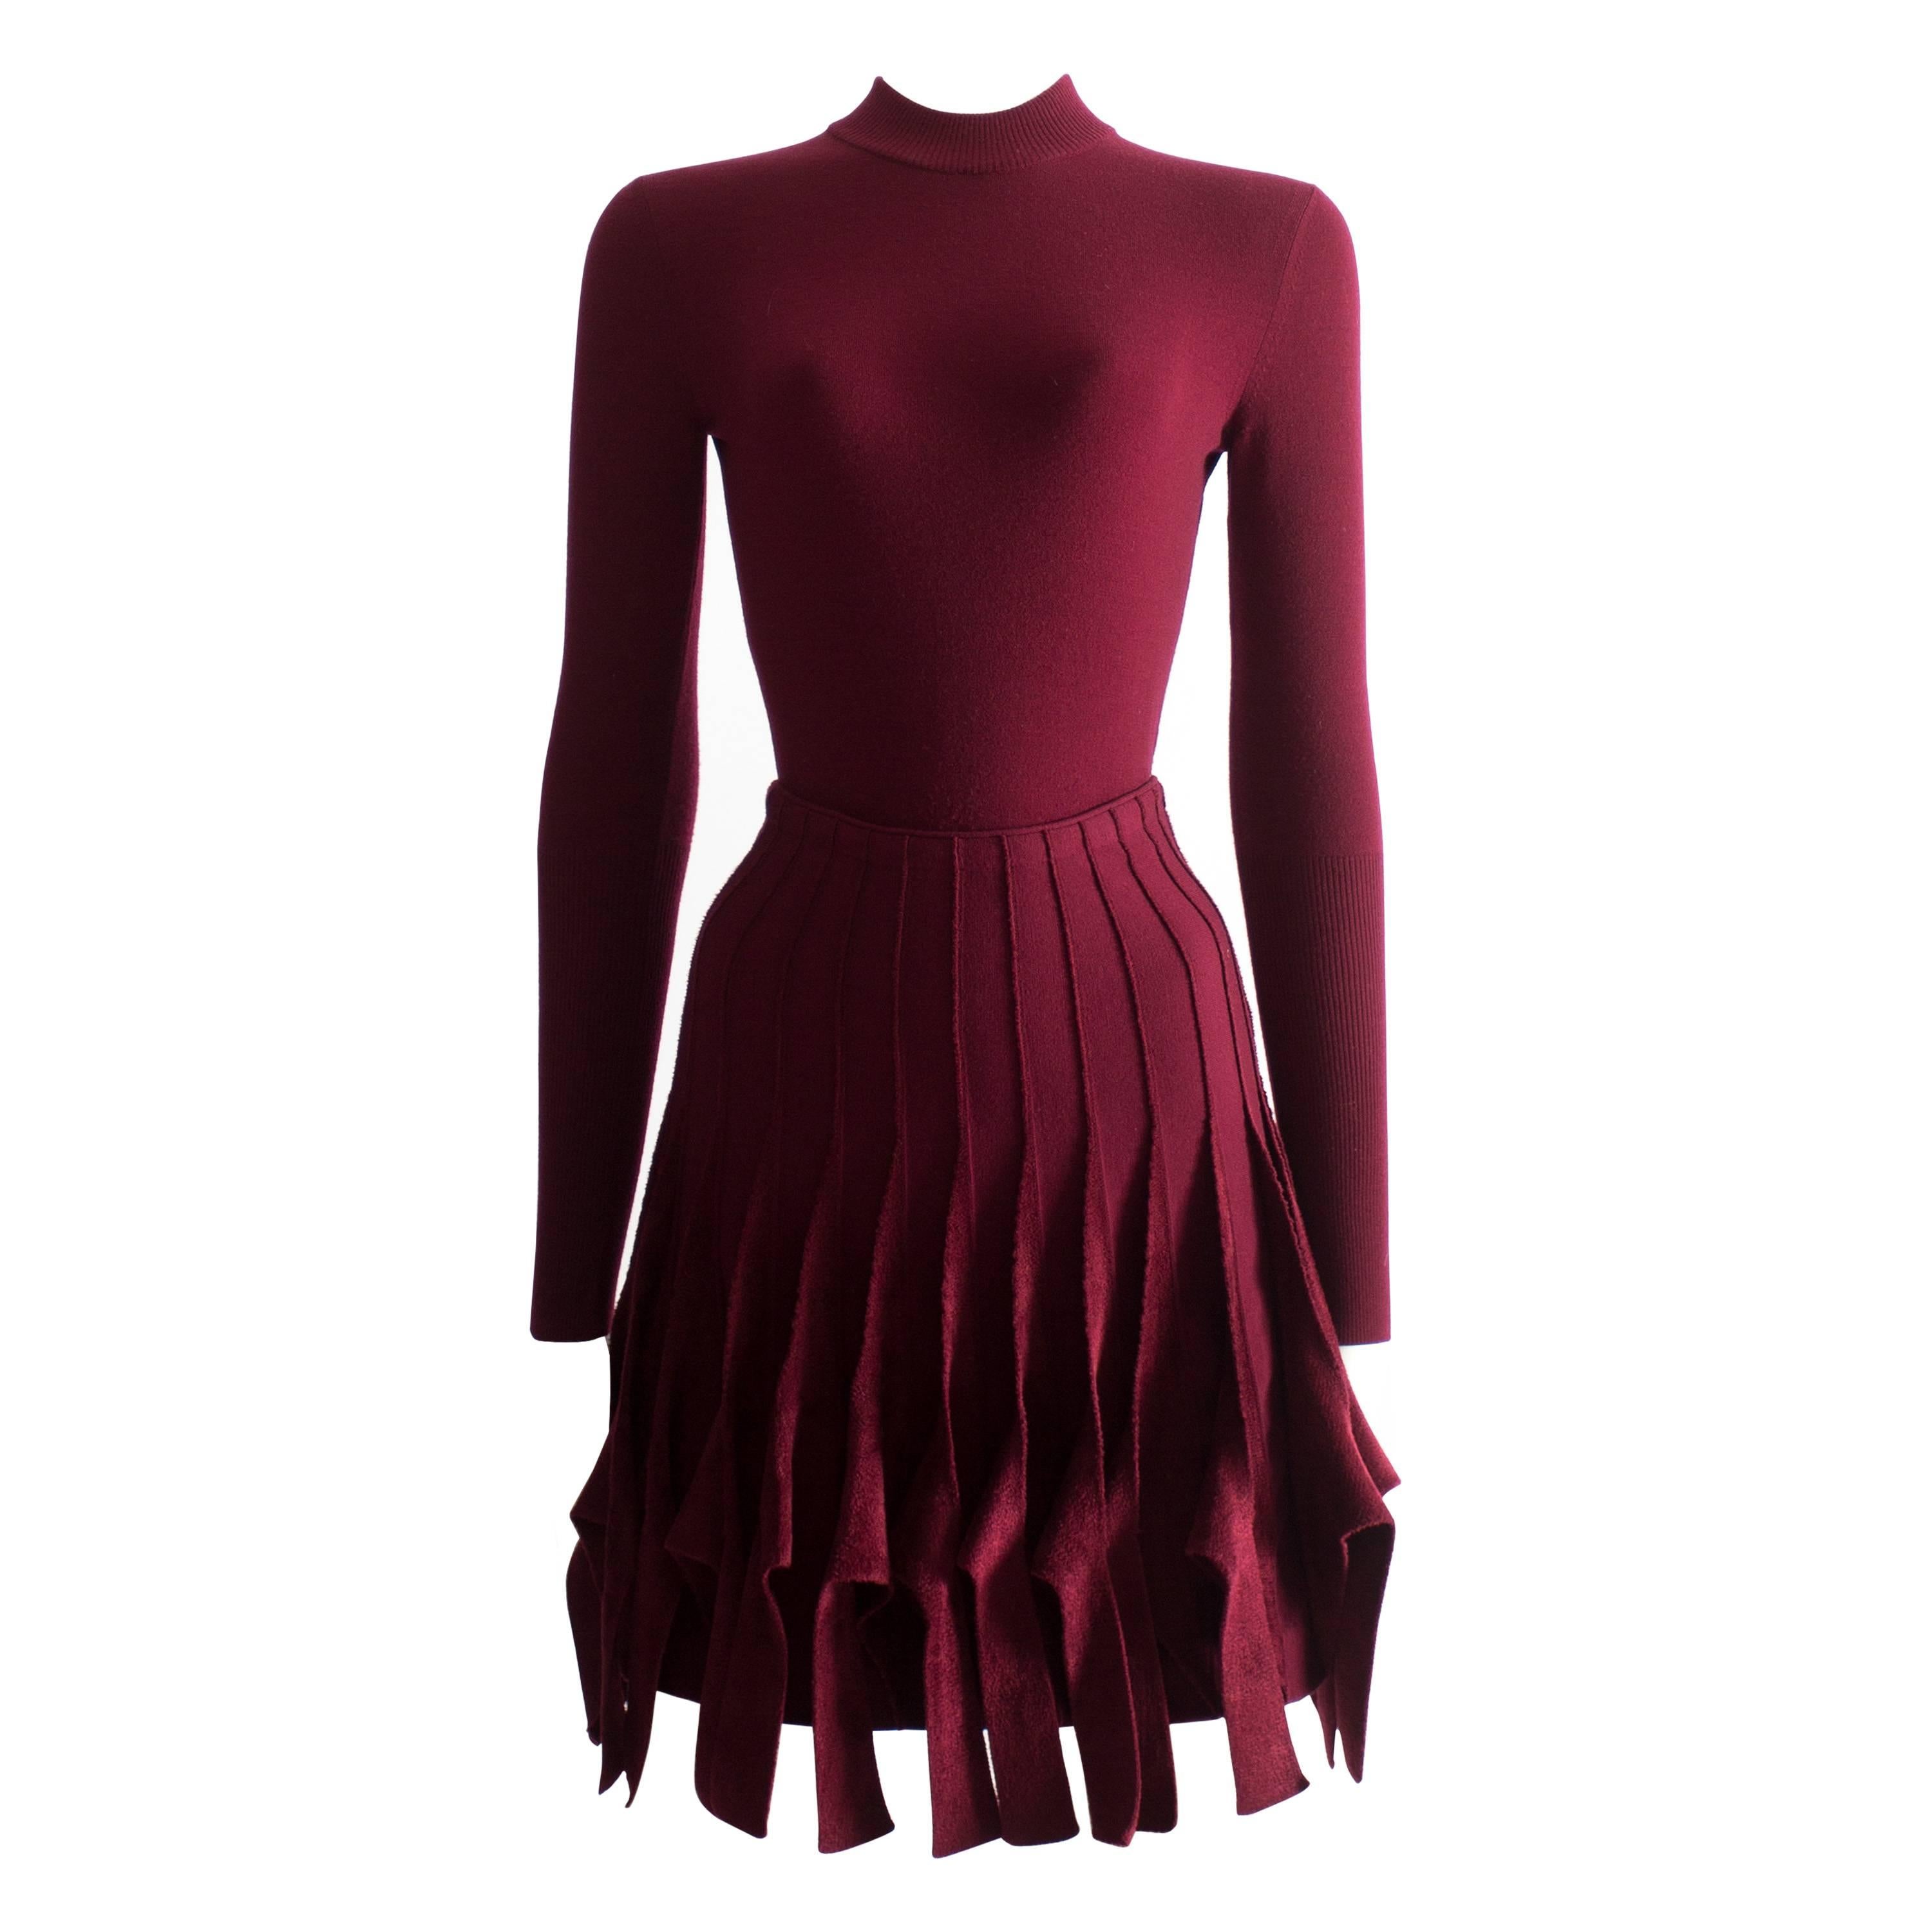 Alaia maroon chenille and wool body and skirt ensemble